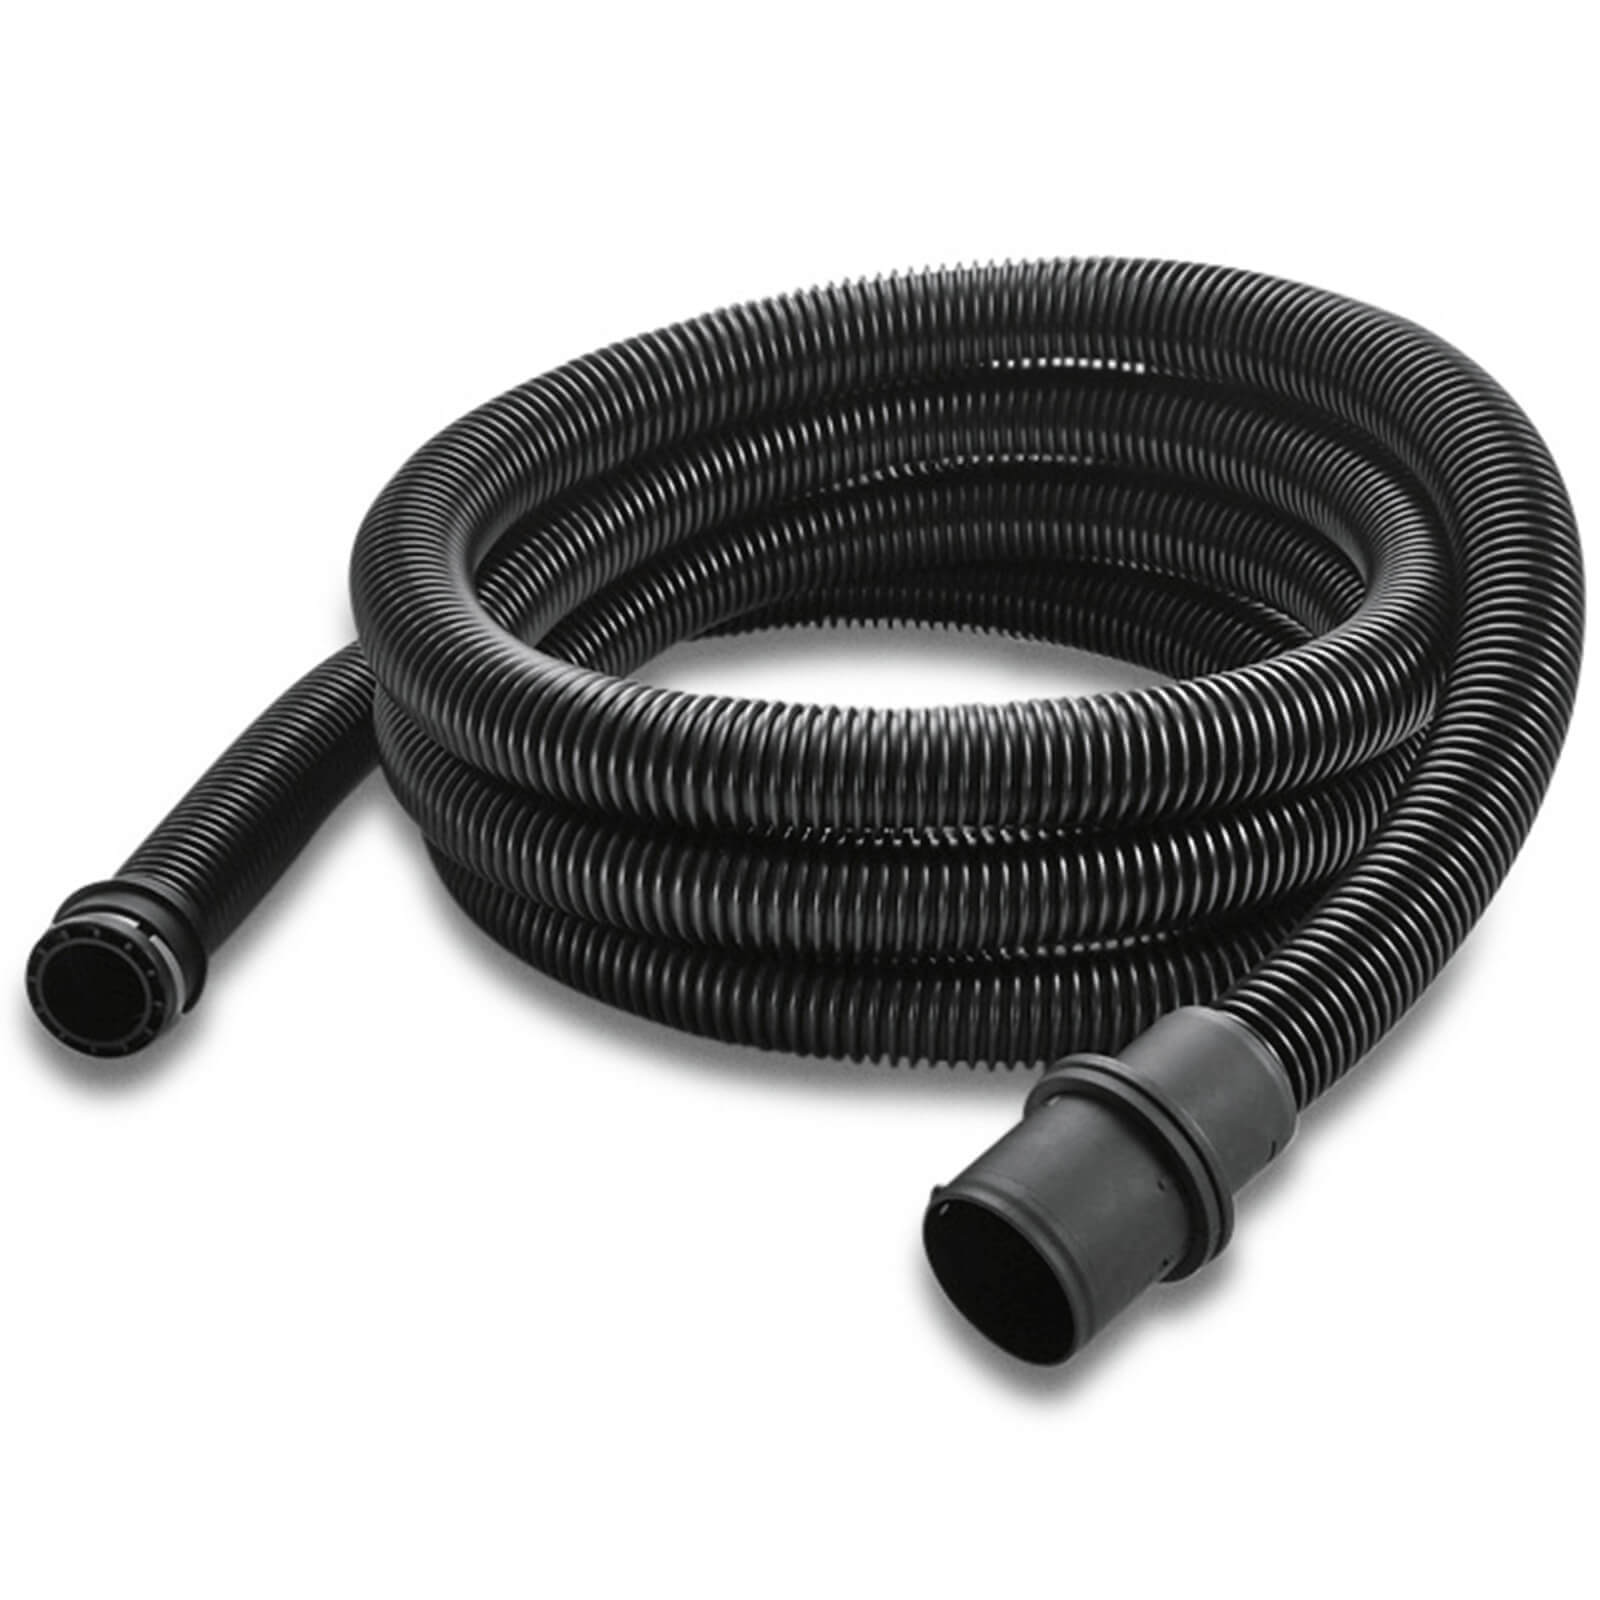 Image of Karcher Anti Static Suction Hose for NT 27/1, 35/1, 45/1 and 48/1 Vacuum Cleaners 35mm 4m